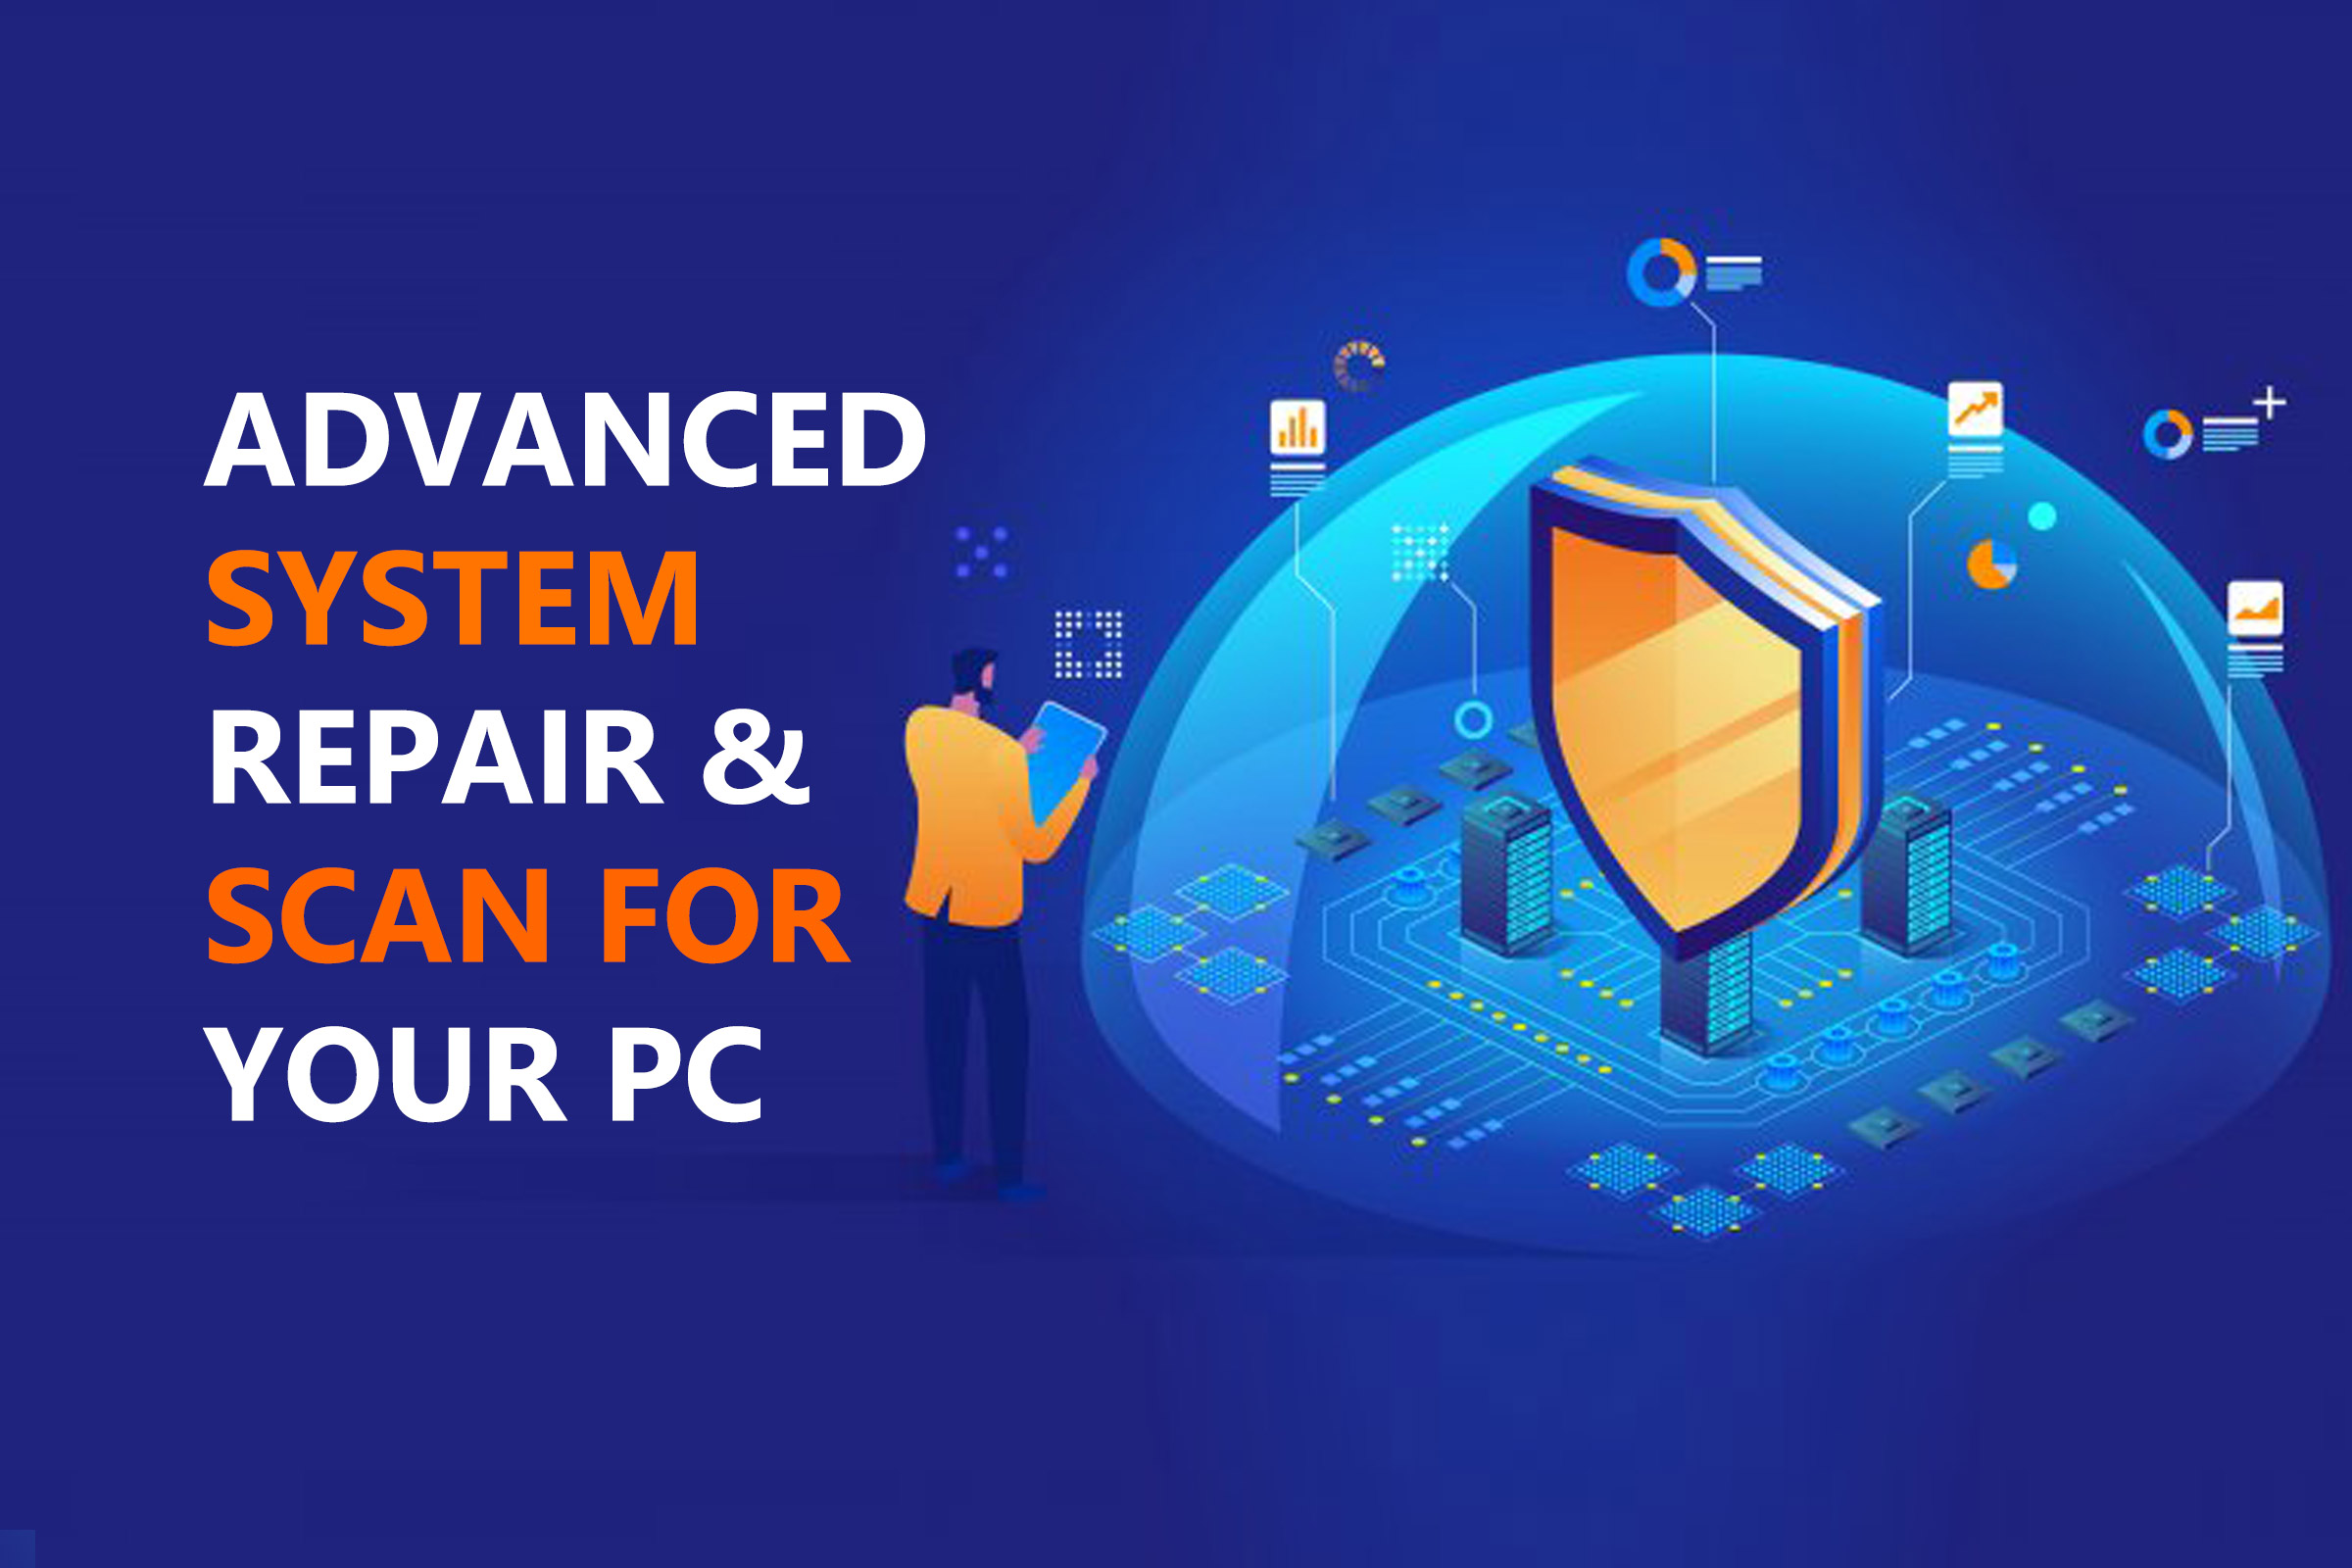 Restoro Review: Advanced system repair & scan for your PC.